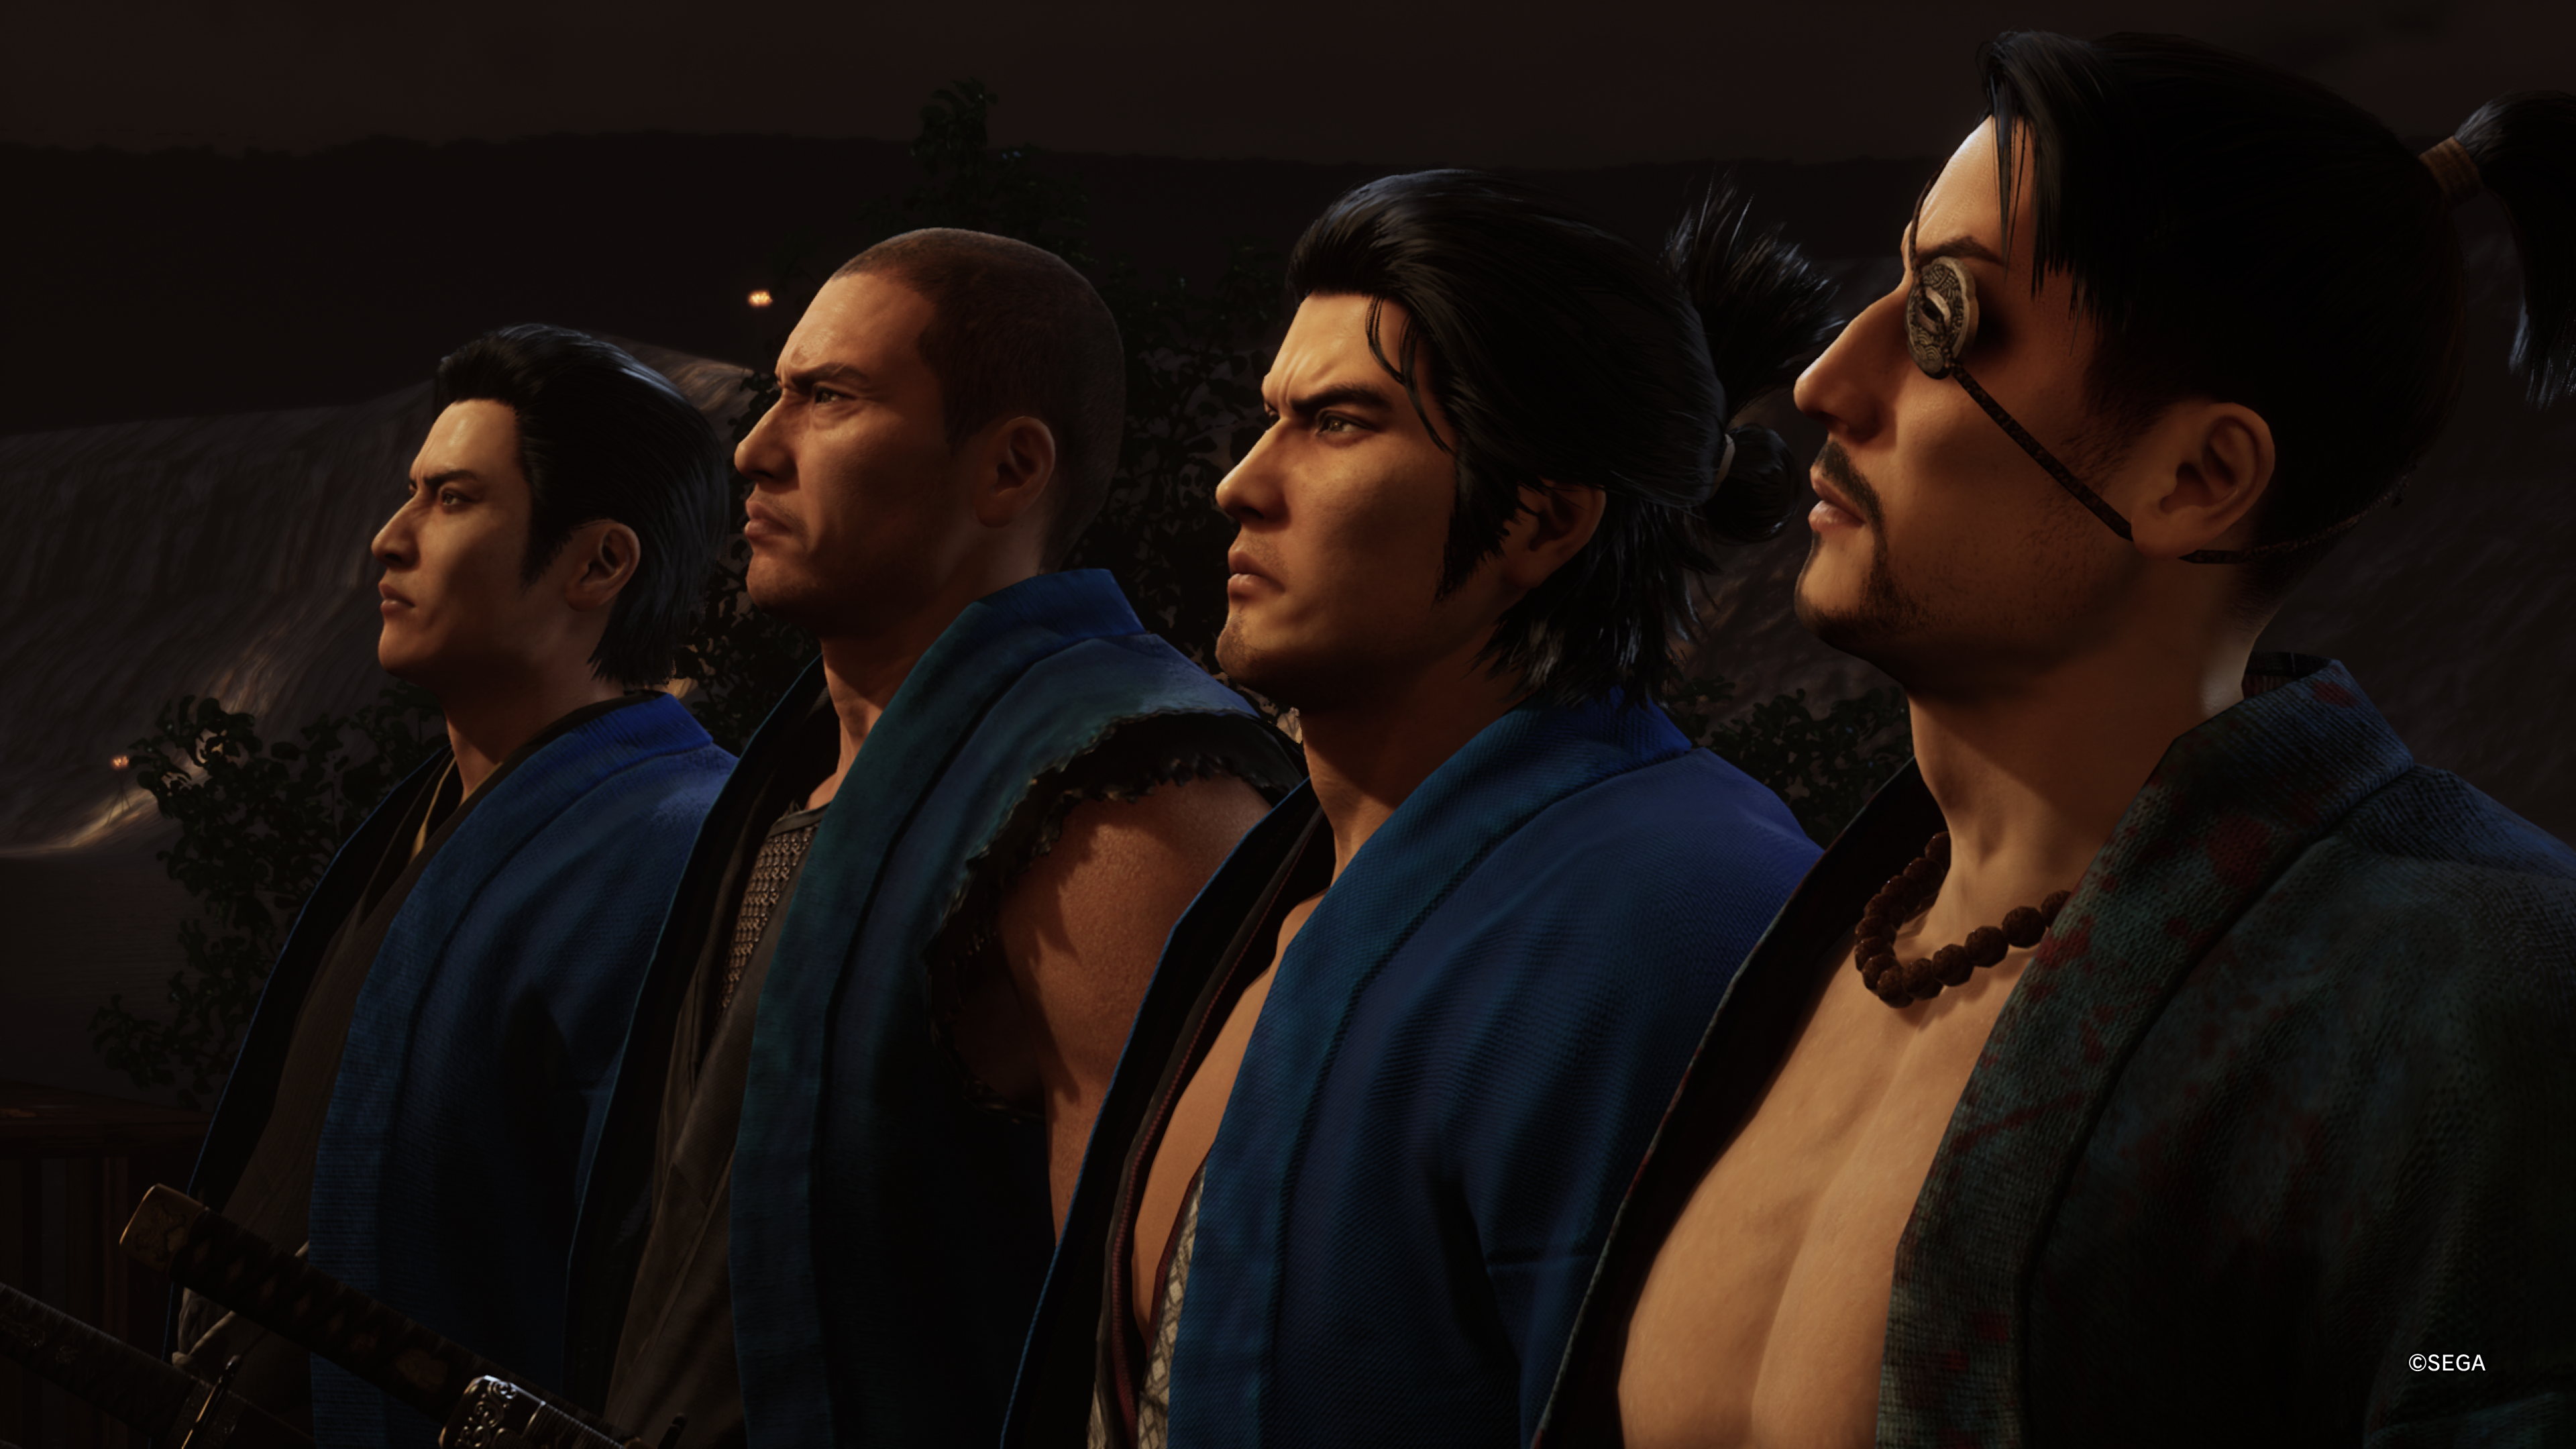 Just like the Dragon Ishin comment - Ryoma and several other key Yakuza characters look serious